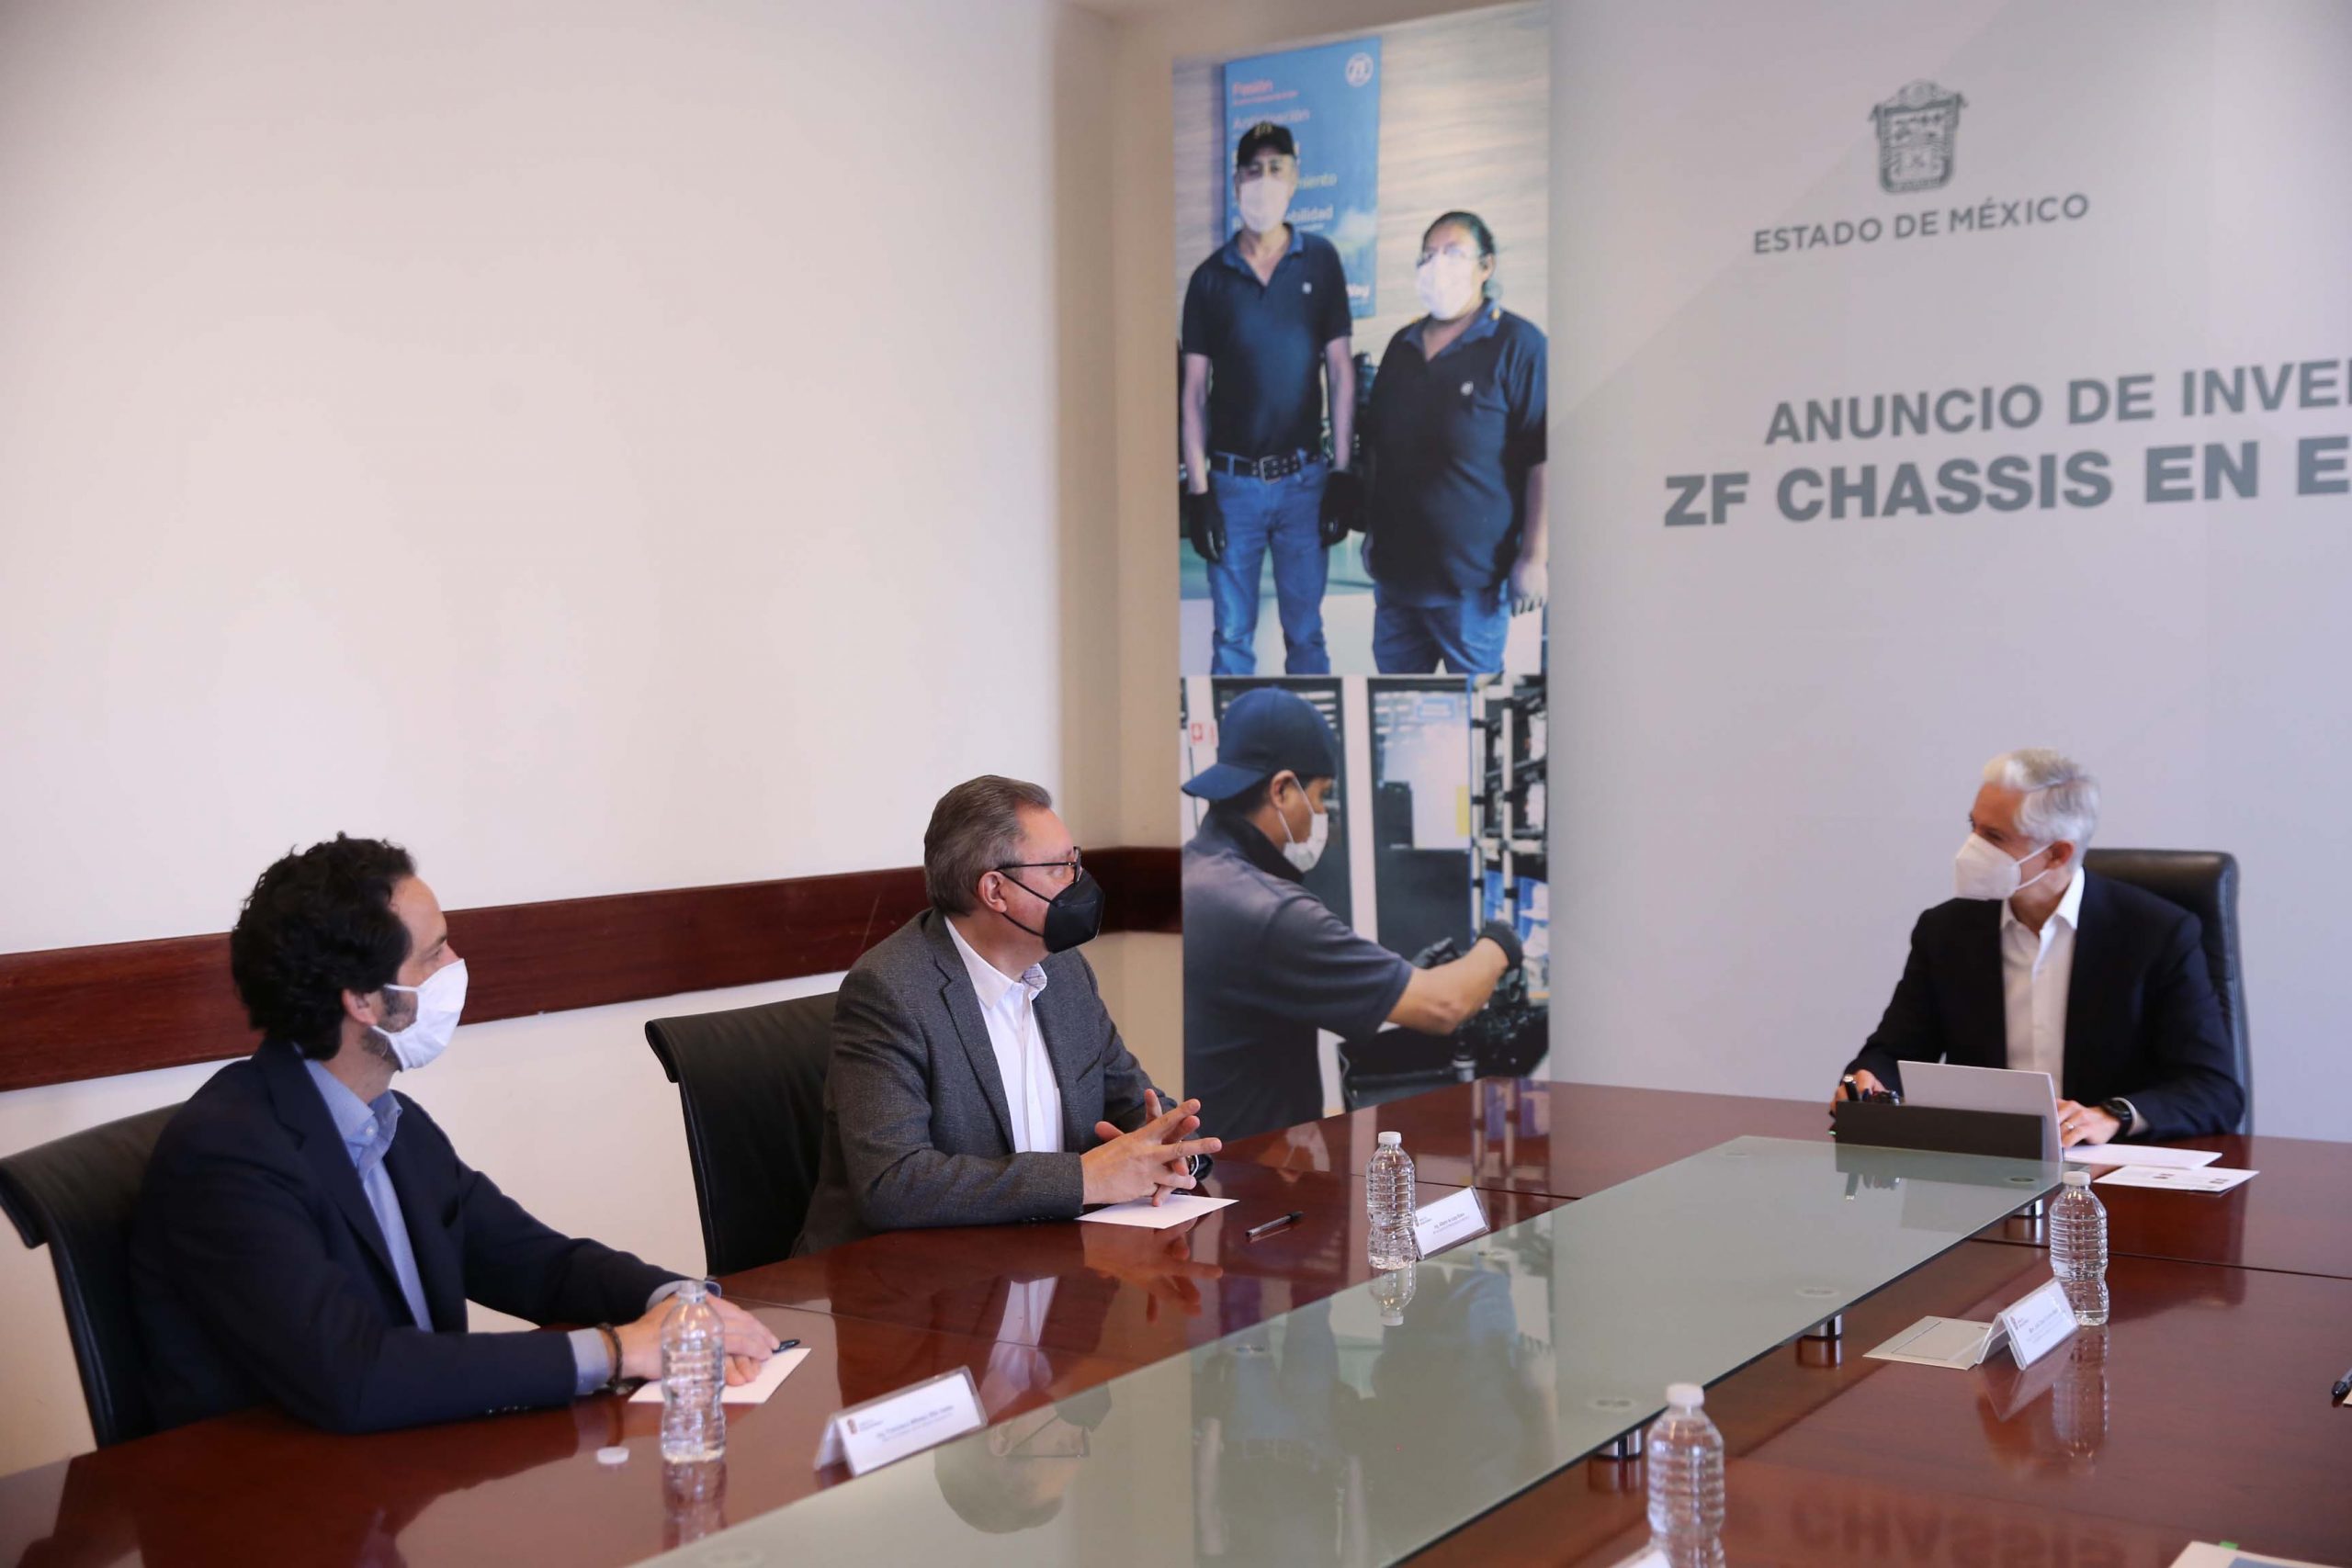 ZF Chassis Technology to invest US$48.4 million in Toluca